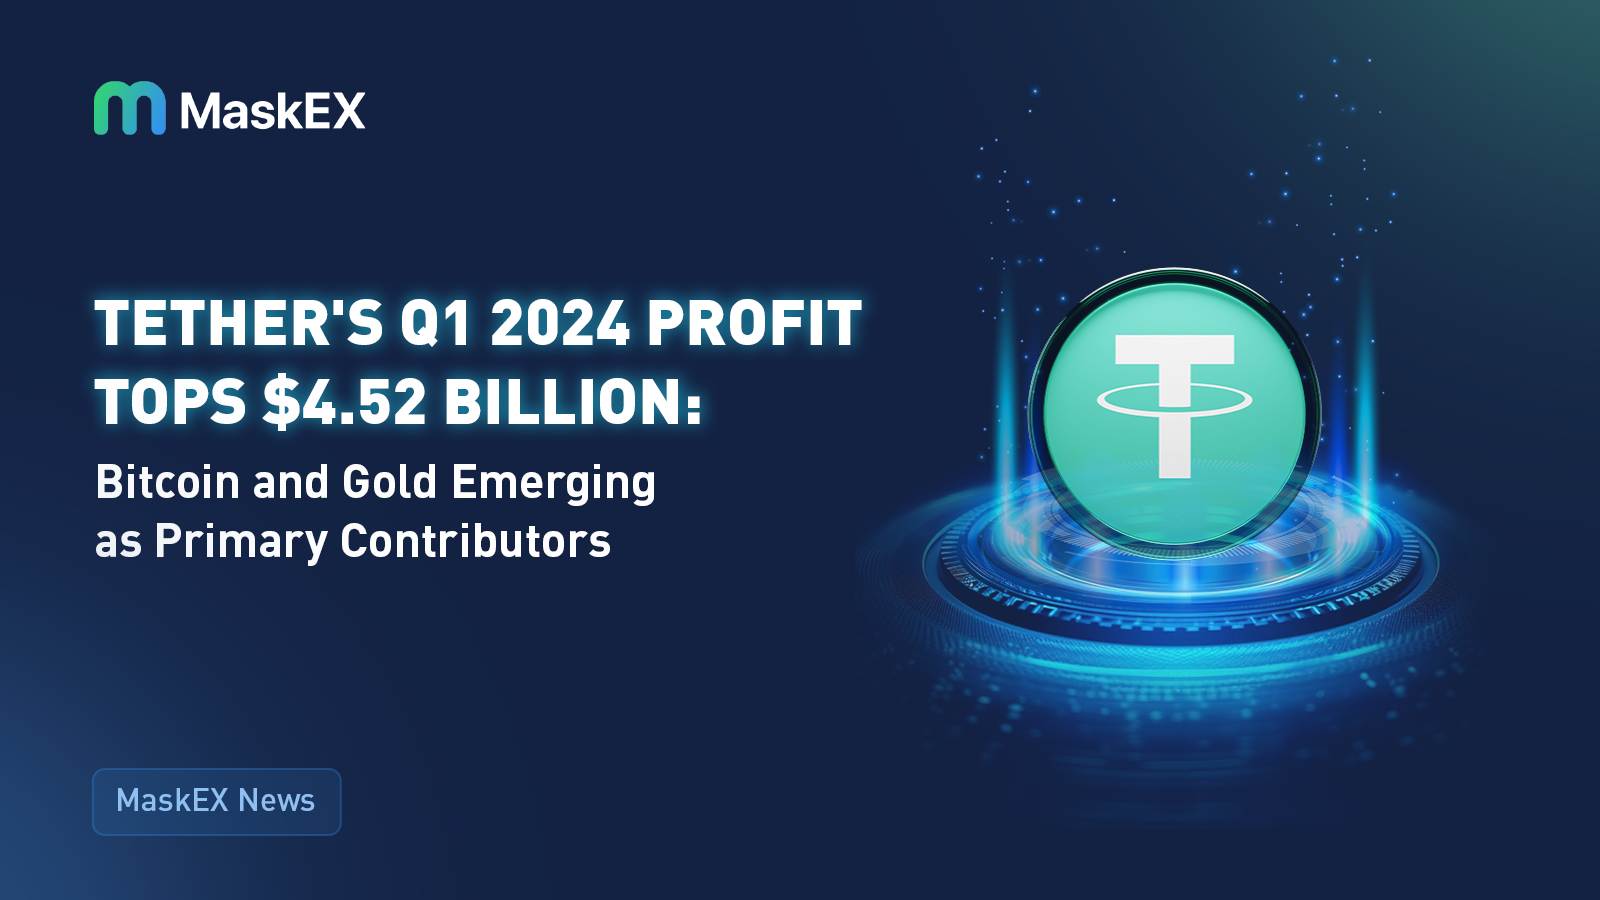 Tether's Q1 2024 Profit Tops $4.52 Billion: Bitcoin and Gold Emerging as Primary Contributors